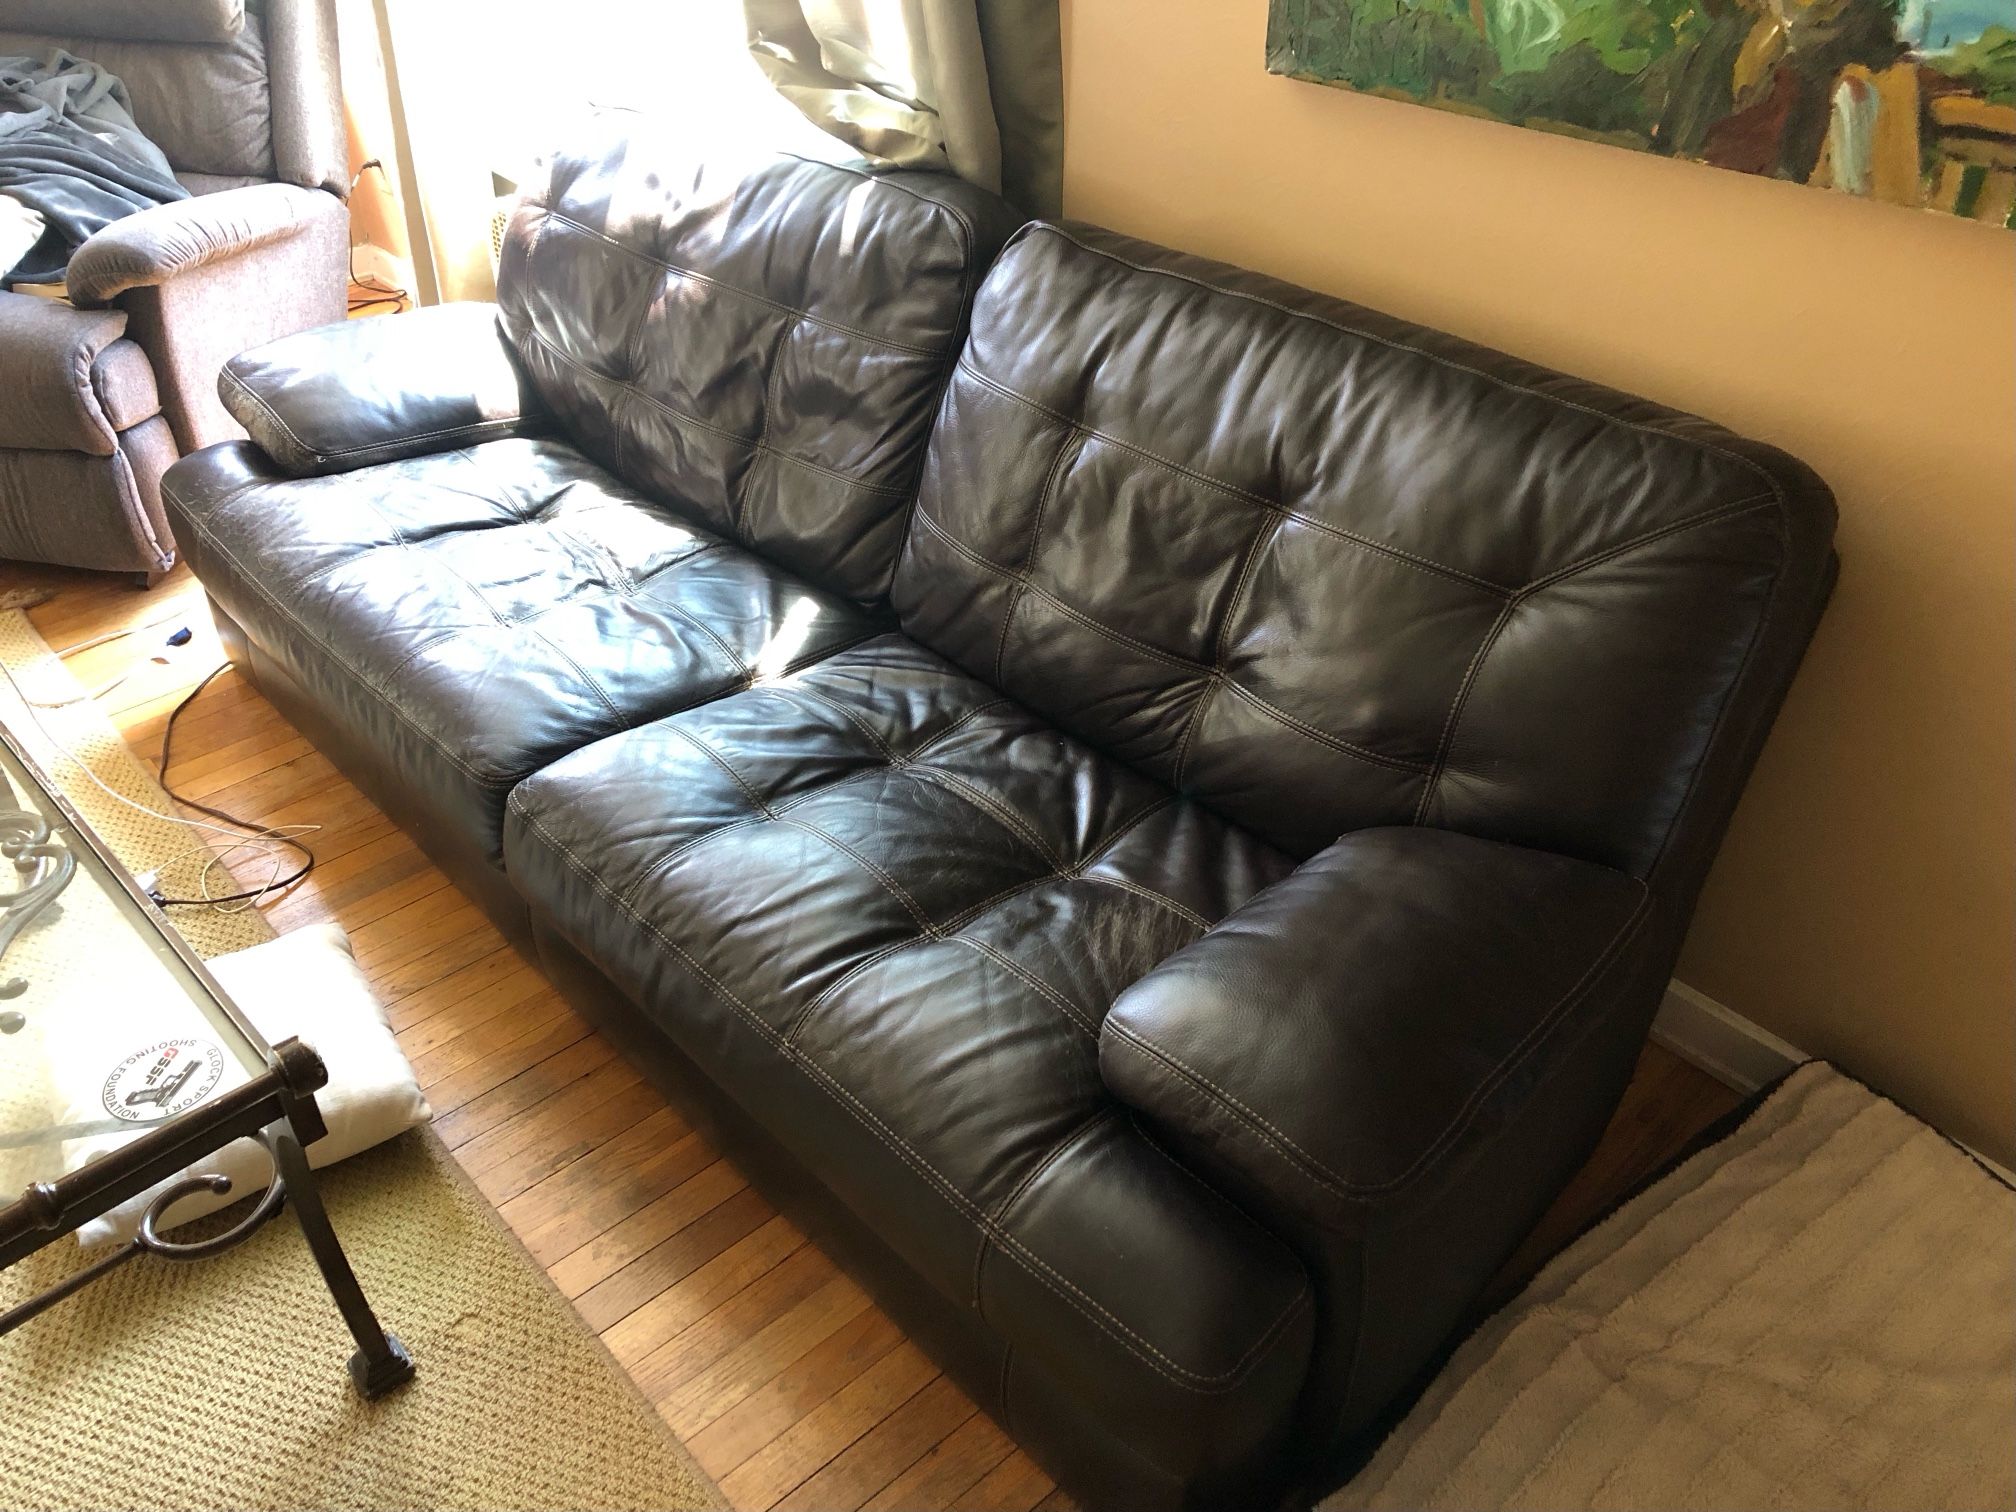 Leather Sofa - $50 Or Best Offer